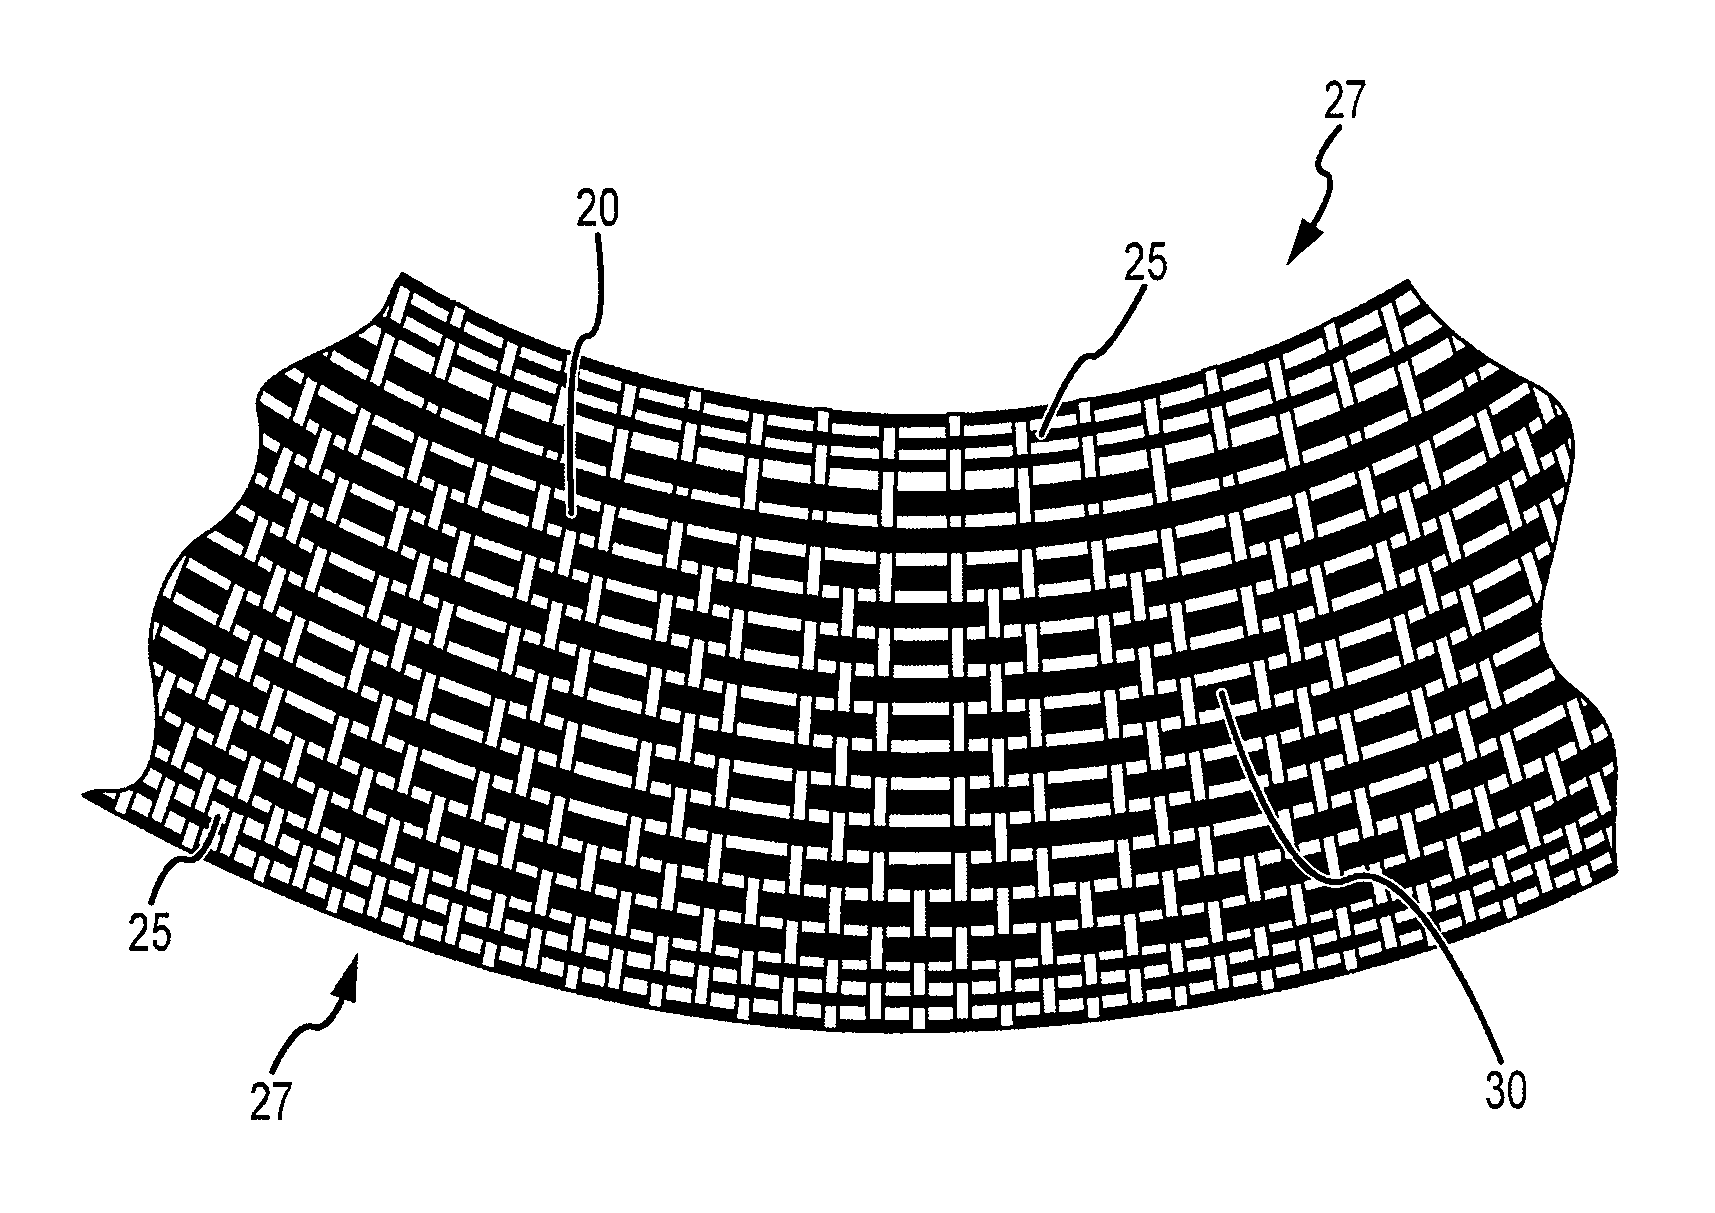 System and method for textile positioning